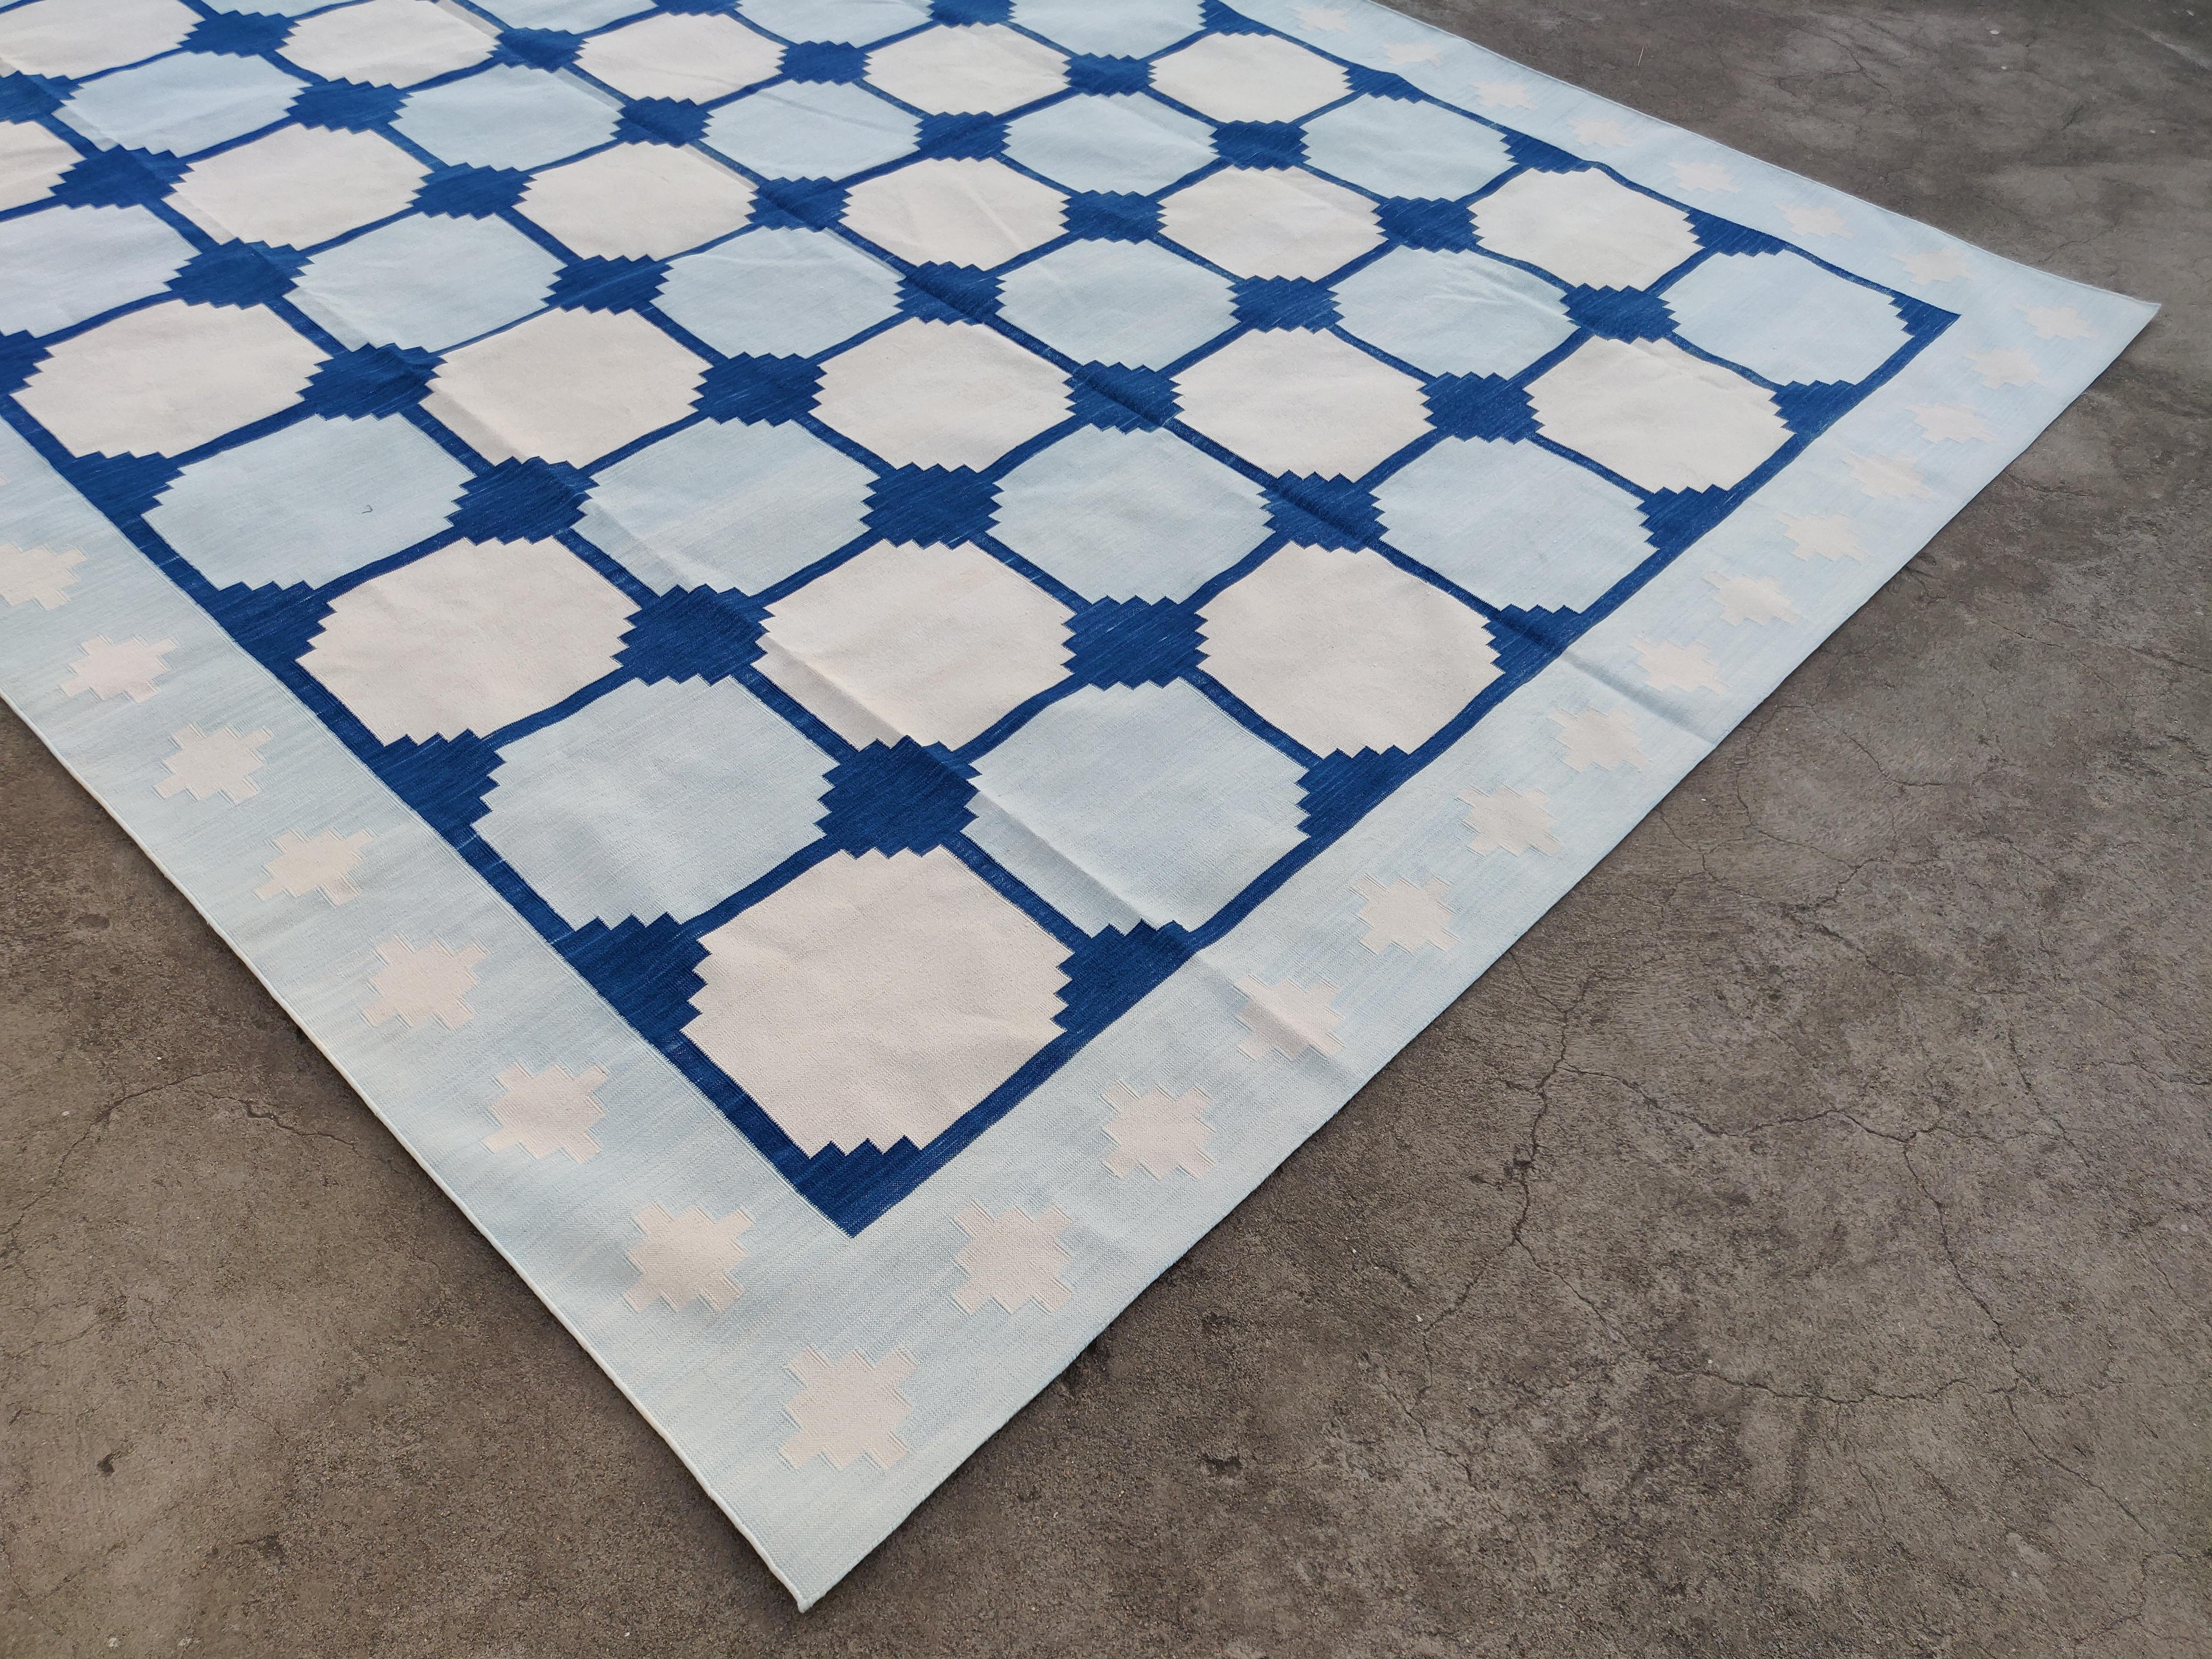 Hand-Woven Handmade Cotton Area Flat Weave Rug, Blue & White Geometric Tile Indian Dhurrie For Sale